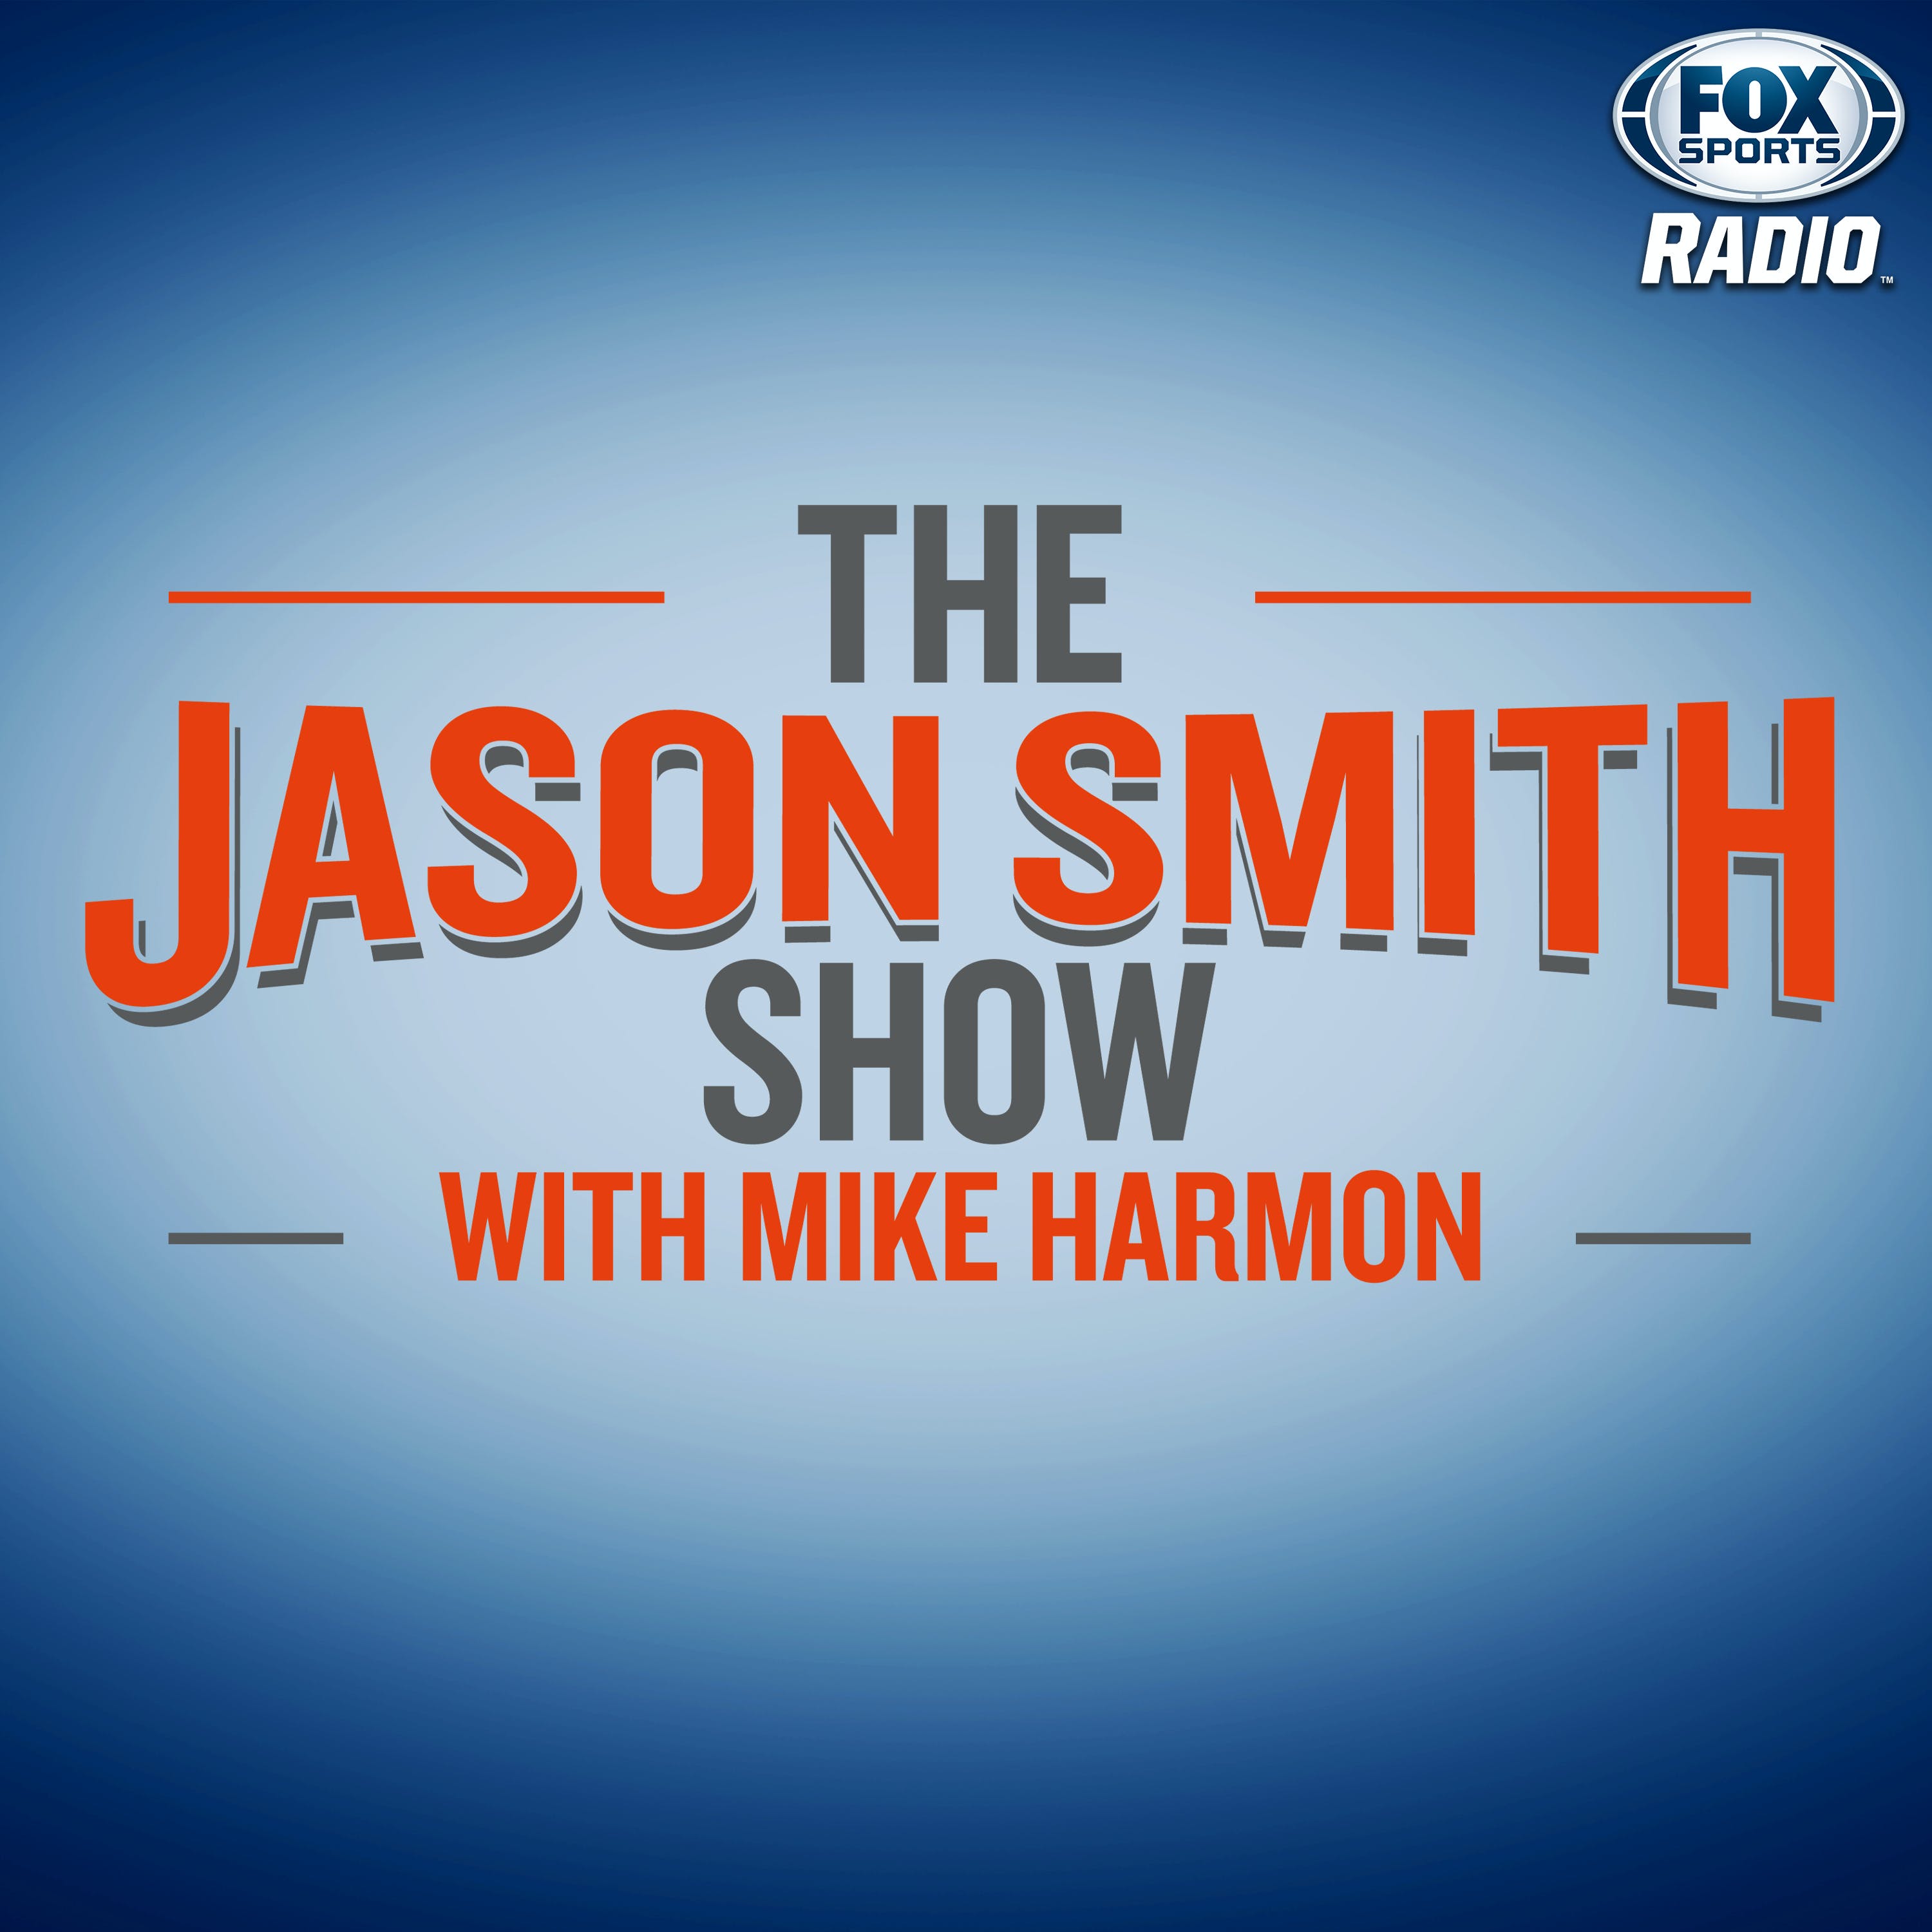 03/01/2021 - Best of The Jason Smith Show